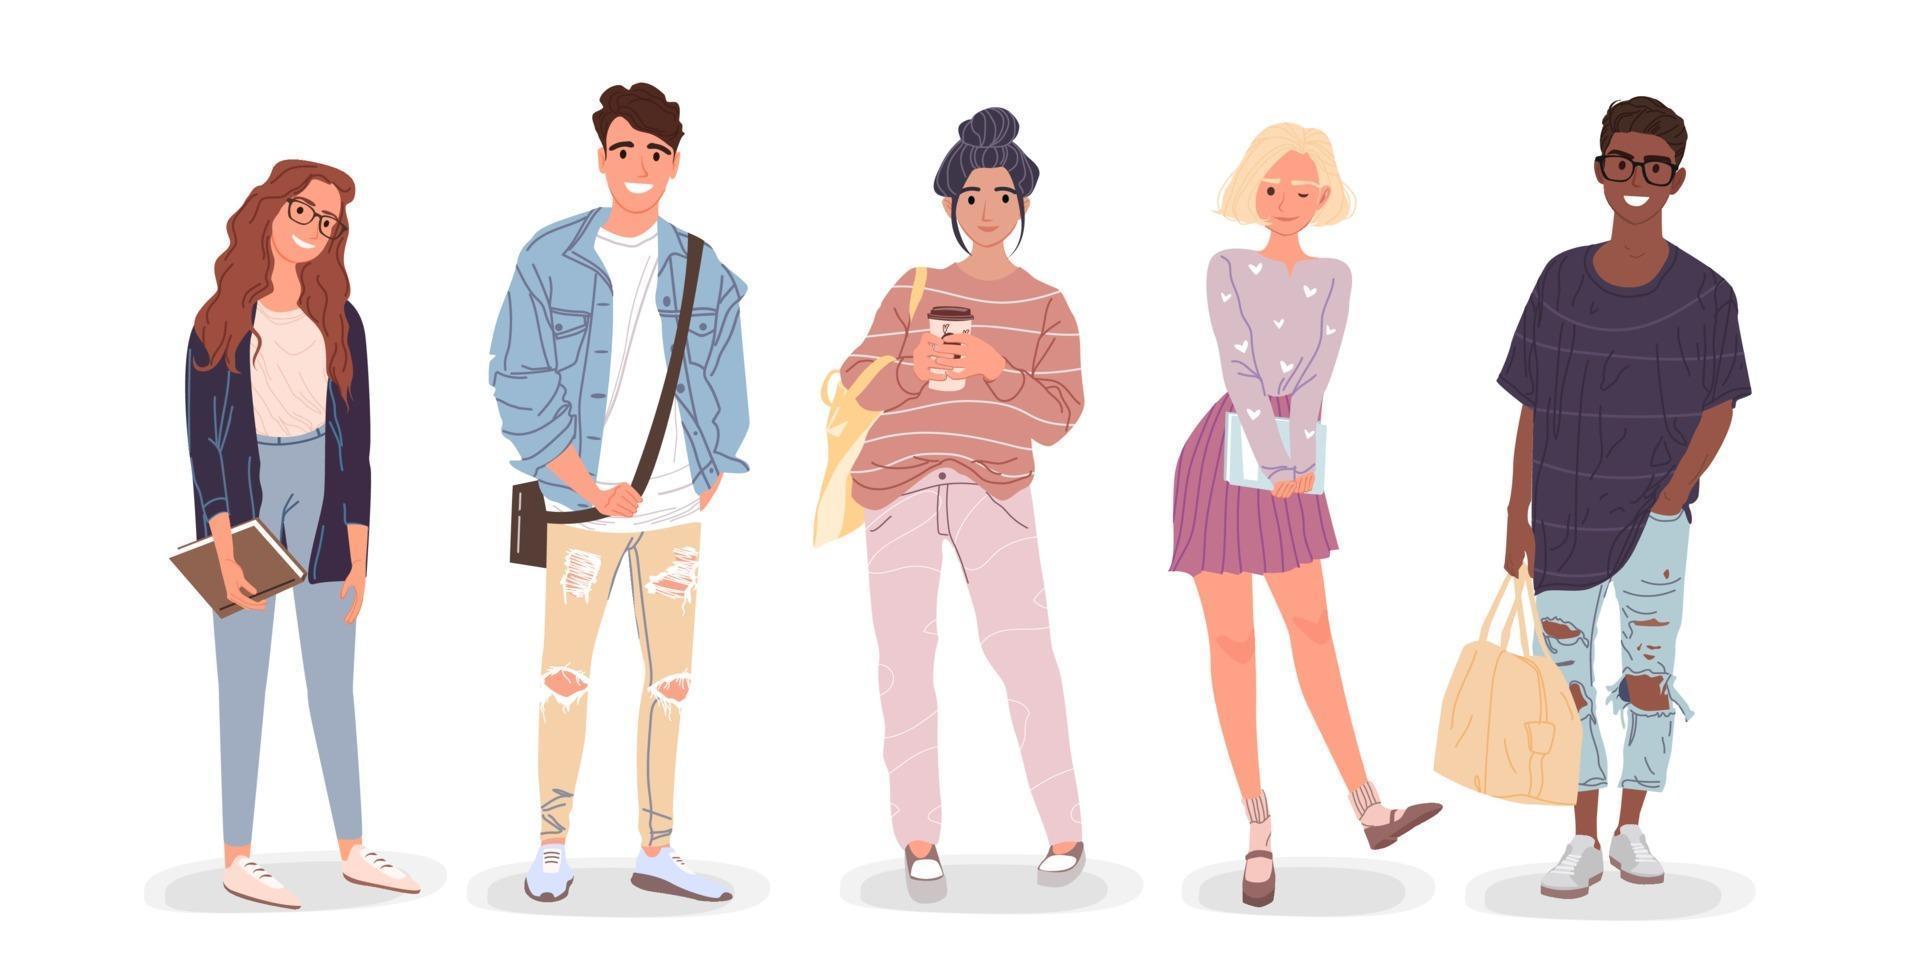 Group of students. Young people. Vector illustration.